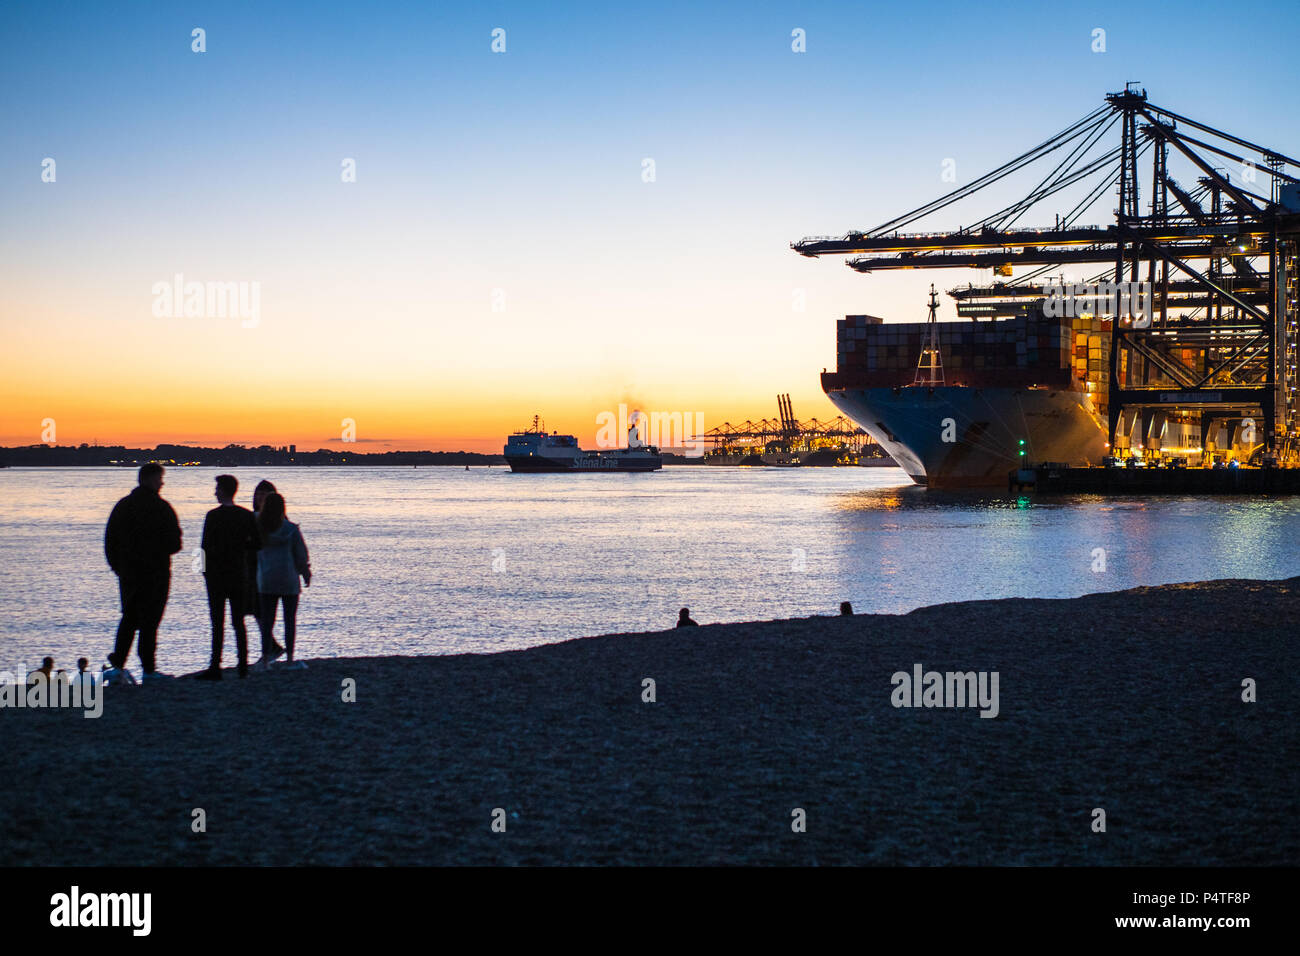 Global Britain Port of Felixstowe - young people view ships loading and unloading containers at dusk in Felixstowe Port, UK's largest container port. Stock Photo